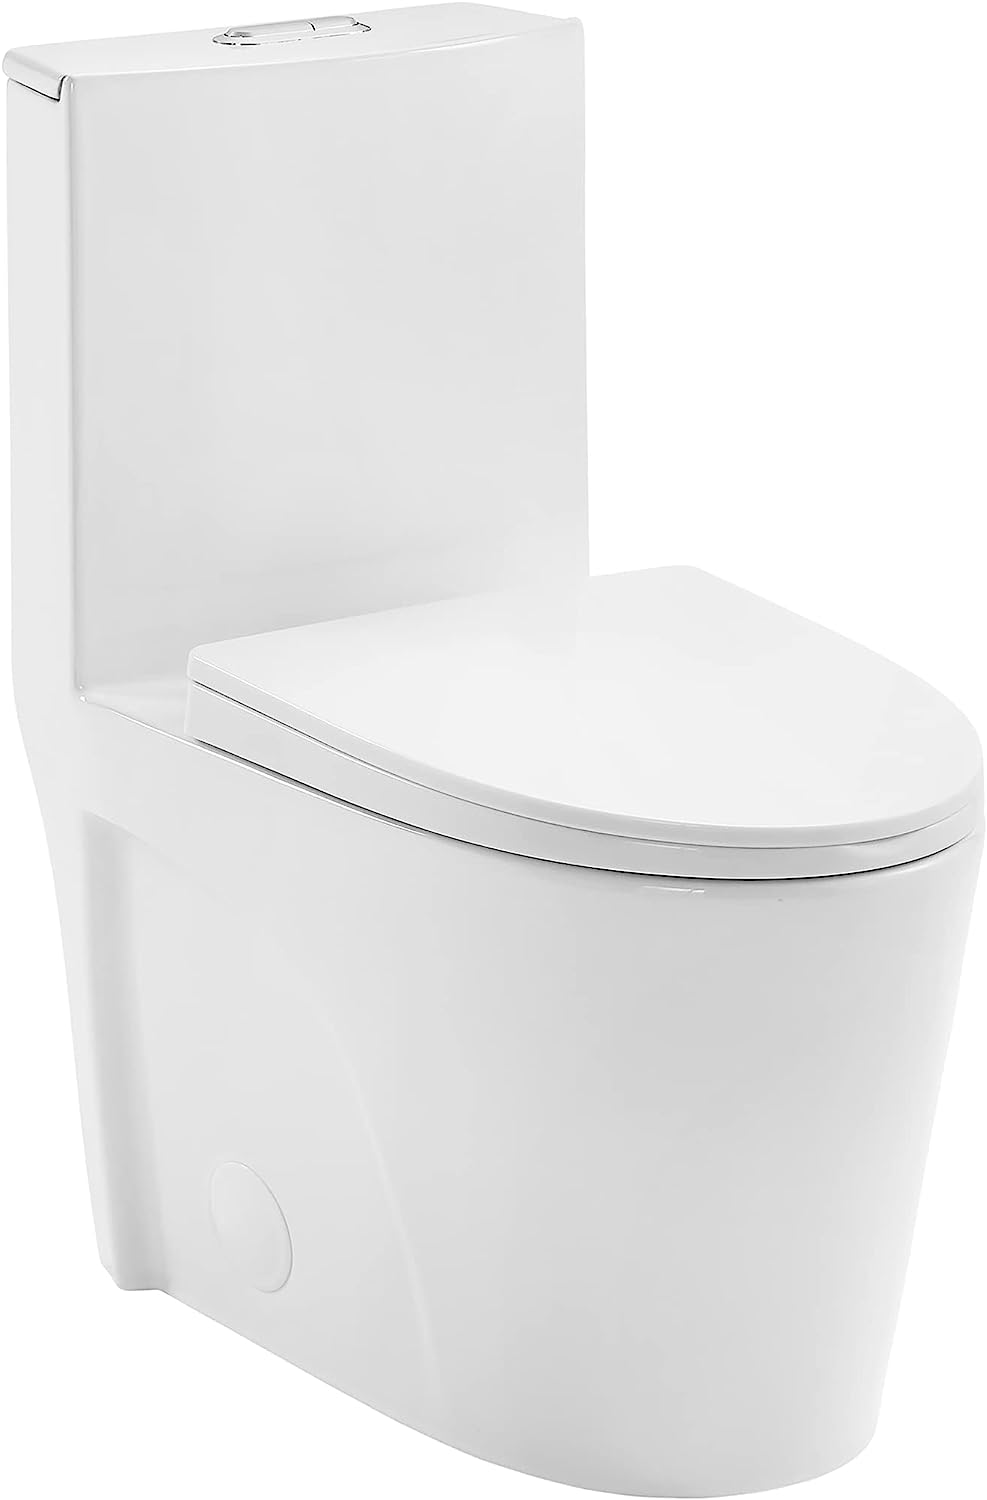 quality toilets product review